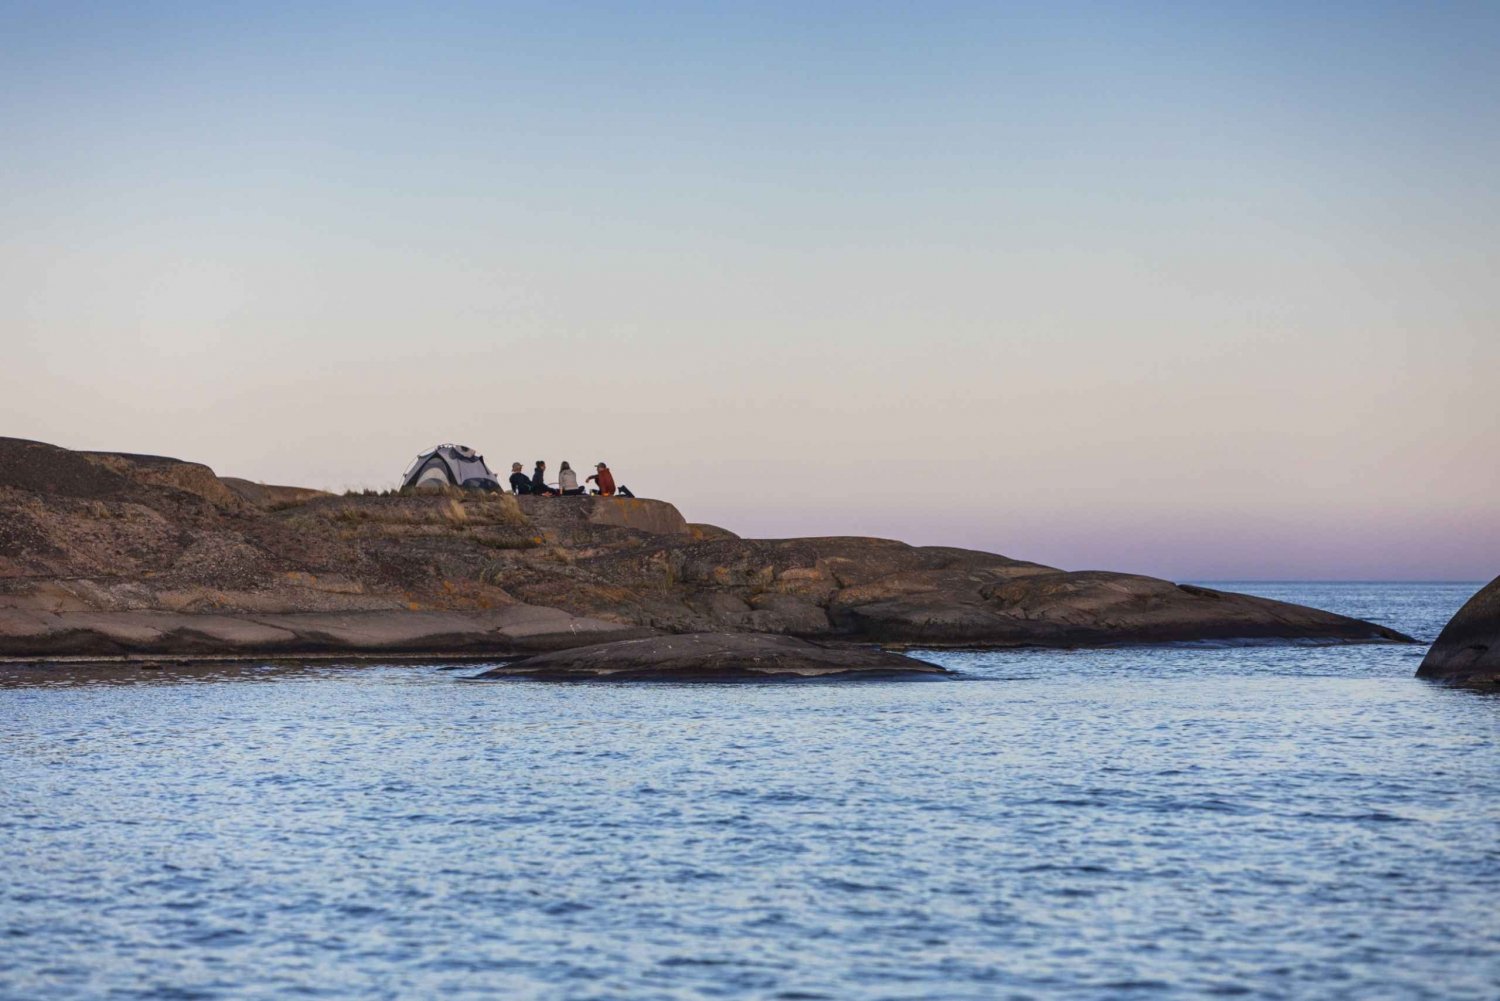 Stockholm Archipelago: 4 Day Self-Guided Kayak and Wild Camp